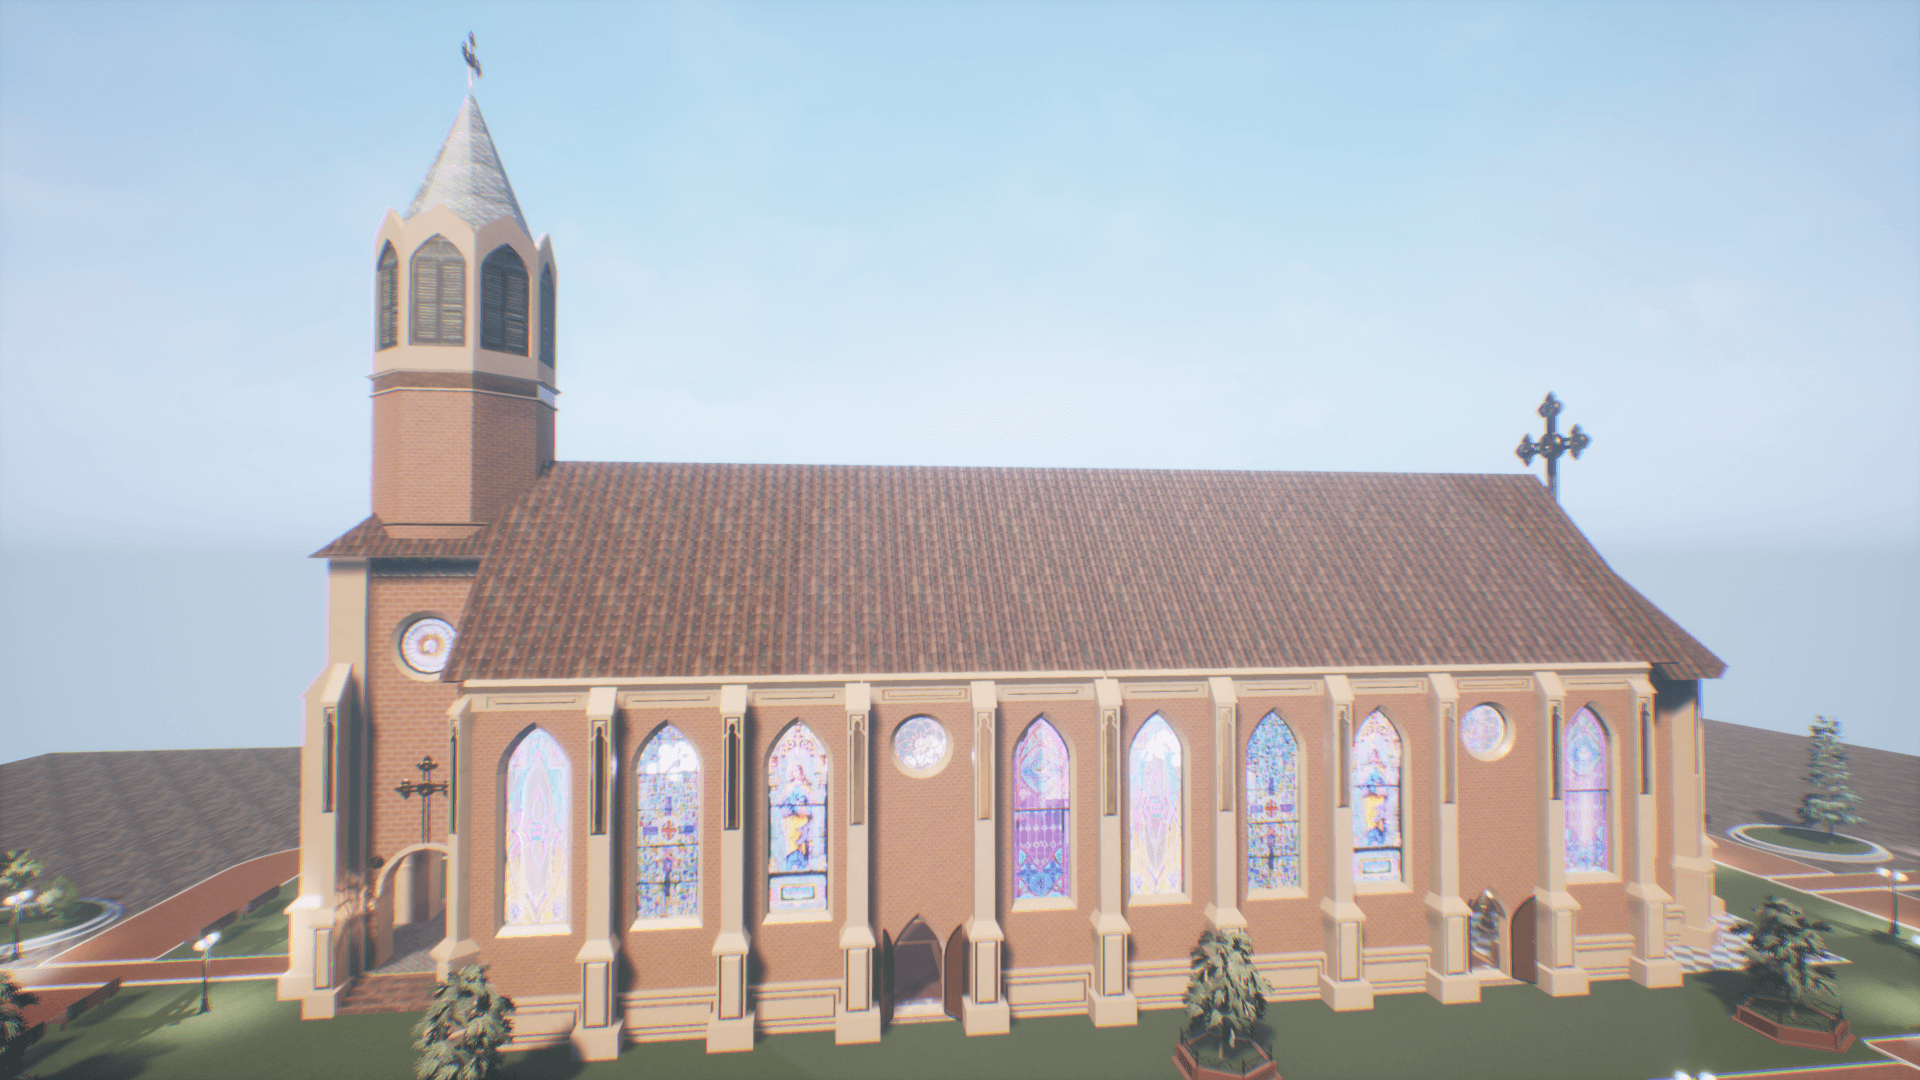 An image showing Cathedral asset pack, created with Unreal Engine.